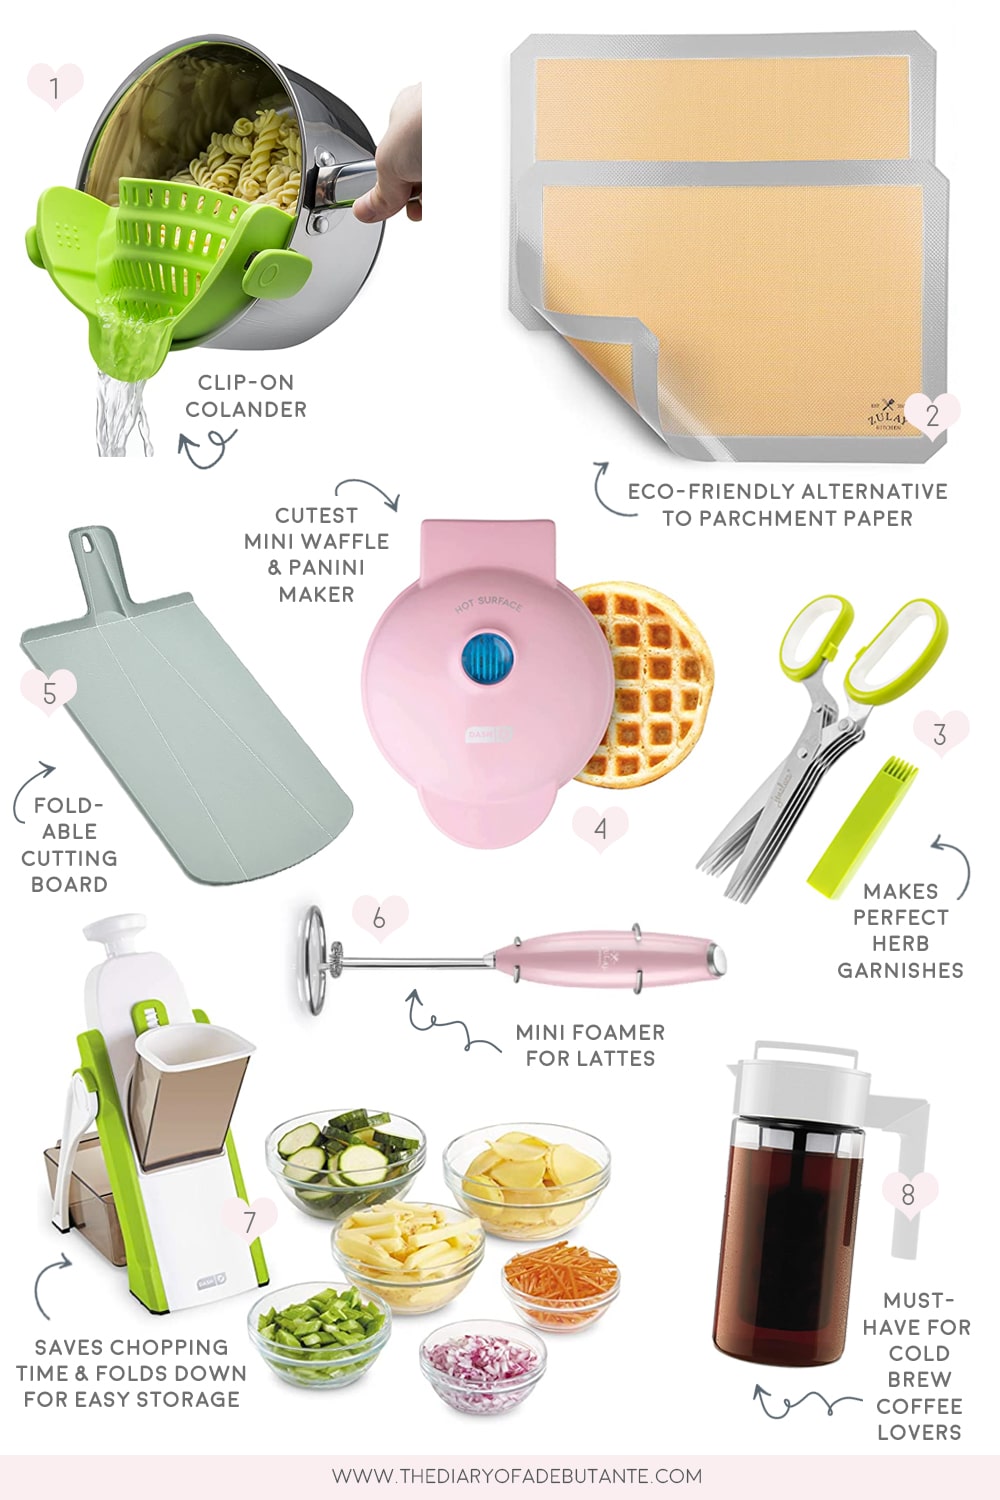 8 of the best kitchen gadgets on Amazon curated by blogger Stephanie Ziajka on Diary of a Debutante